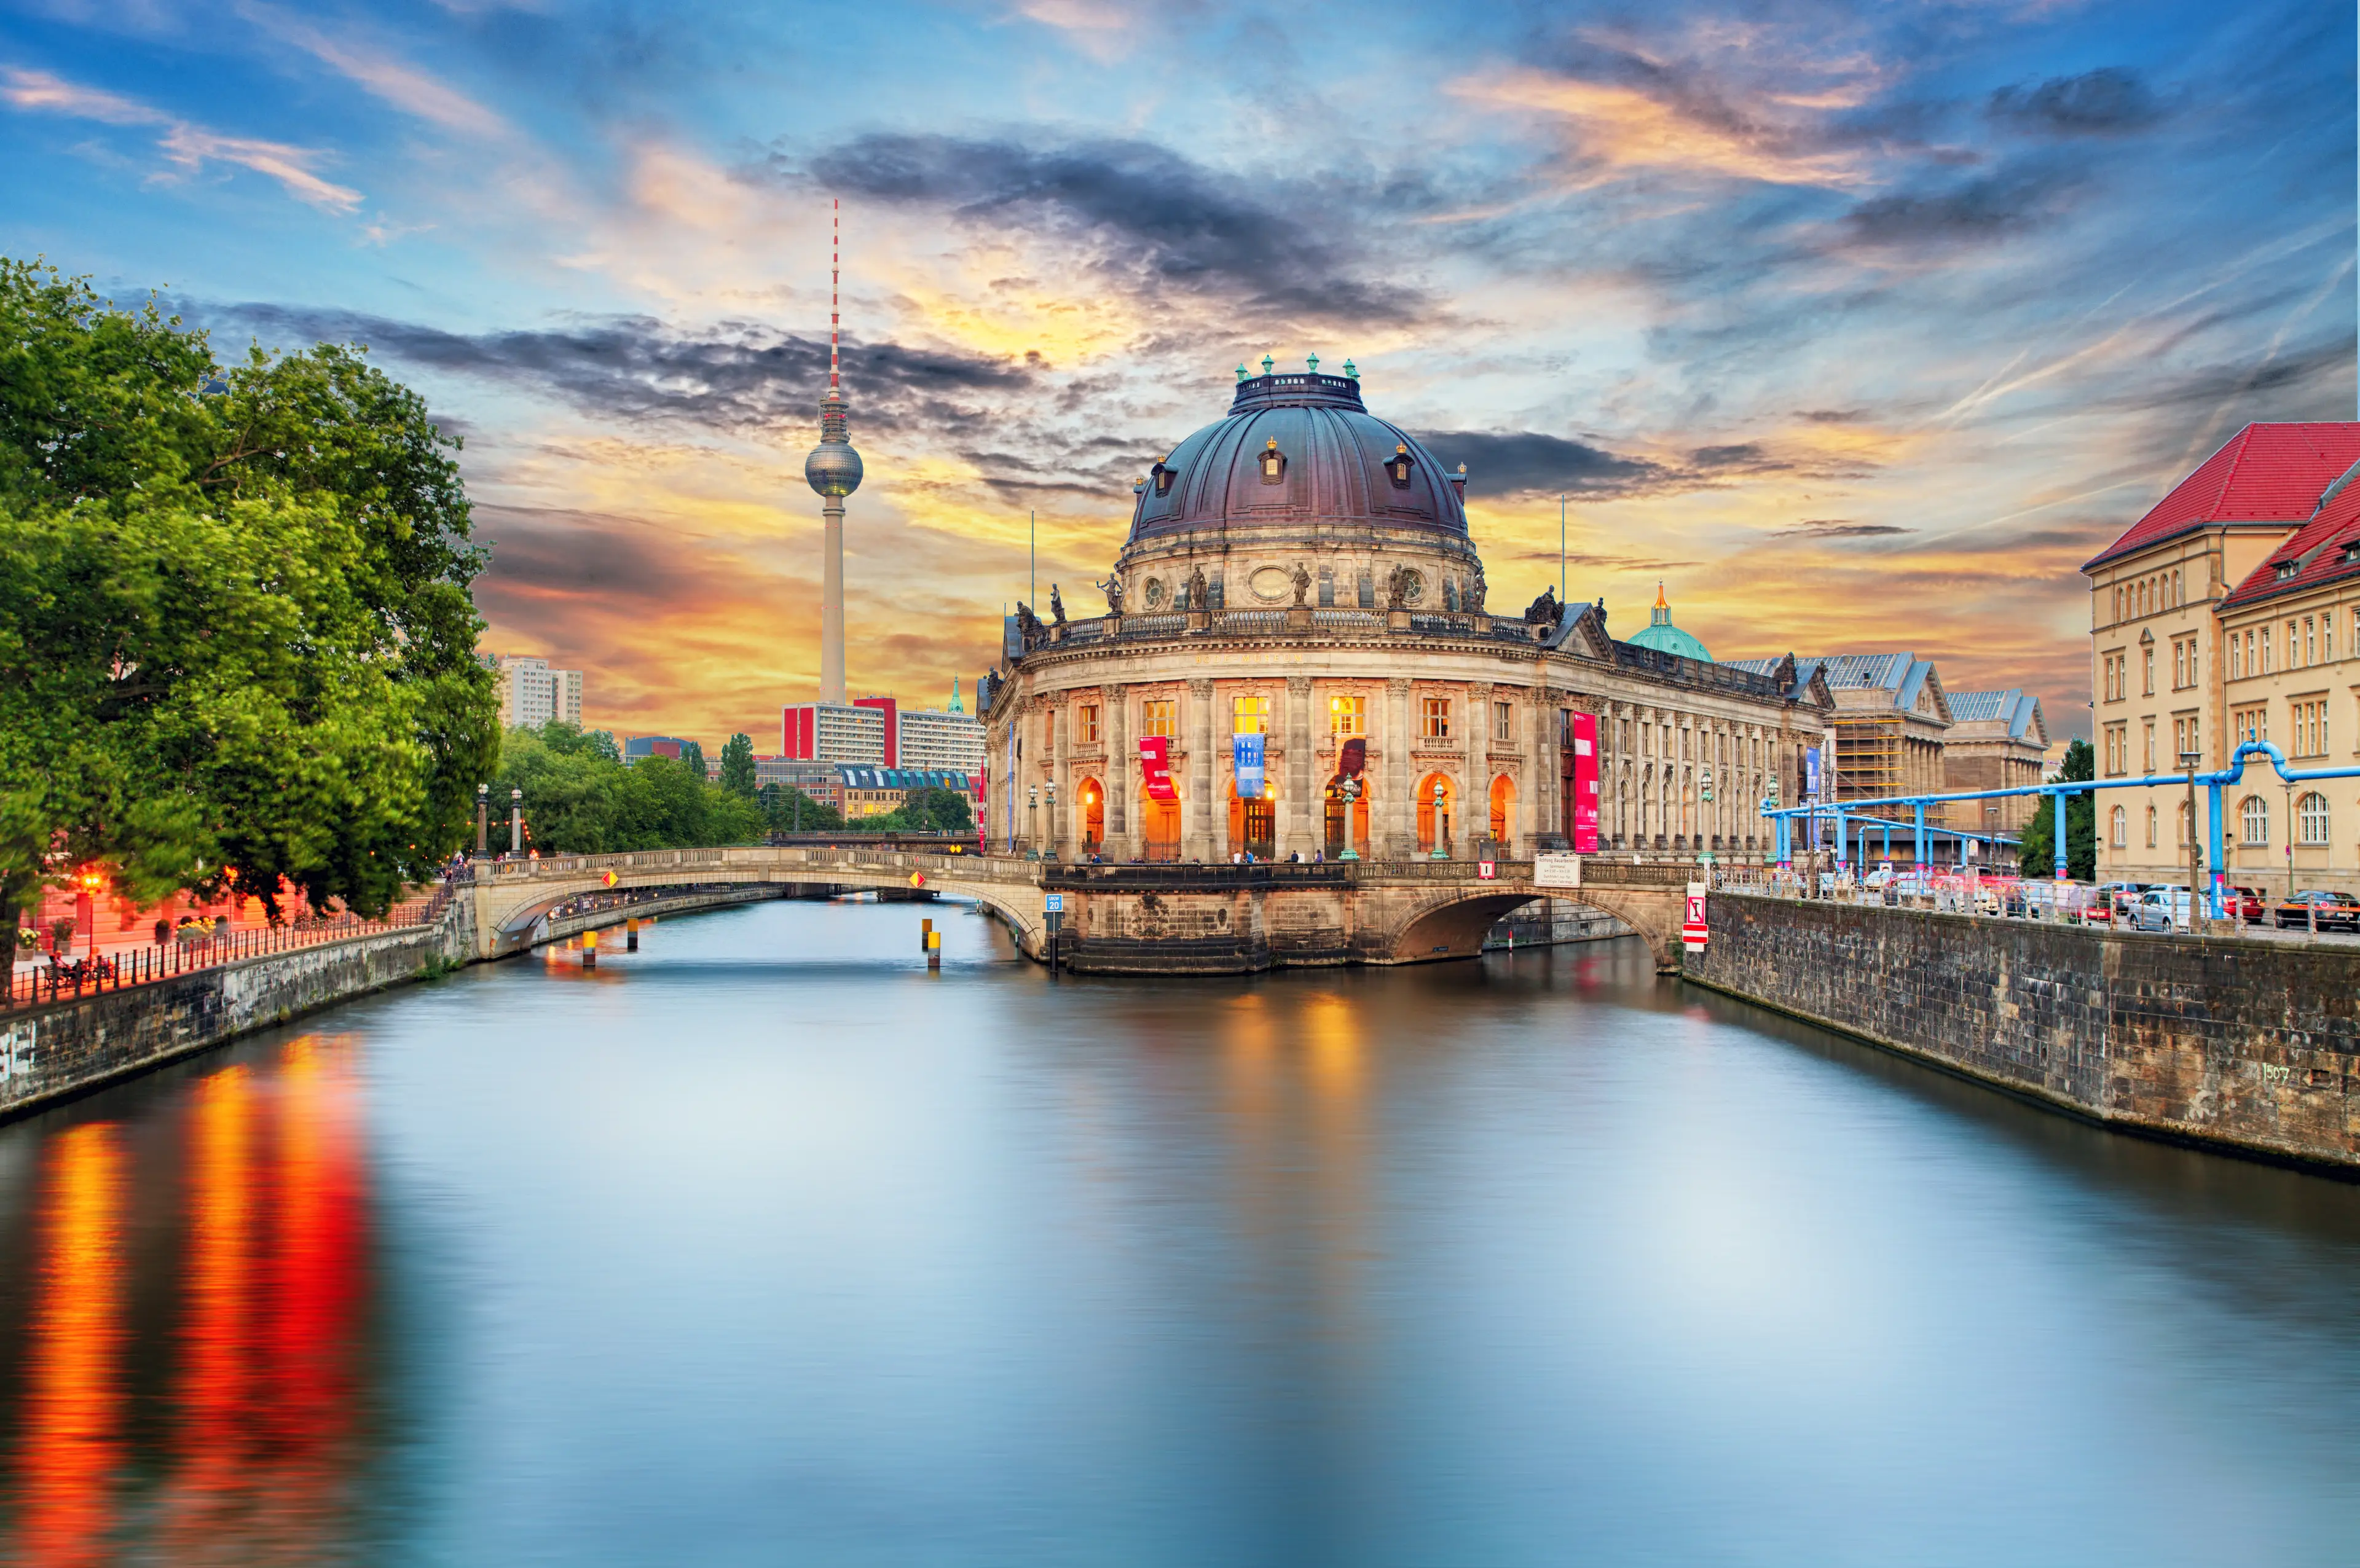 2-Day Exquisite Journey through Berlin, Germany